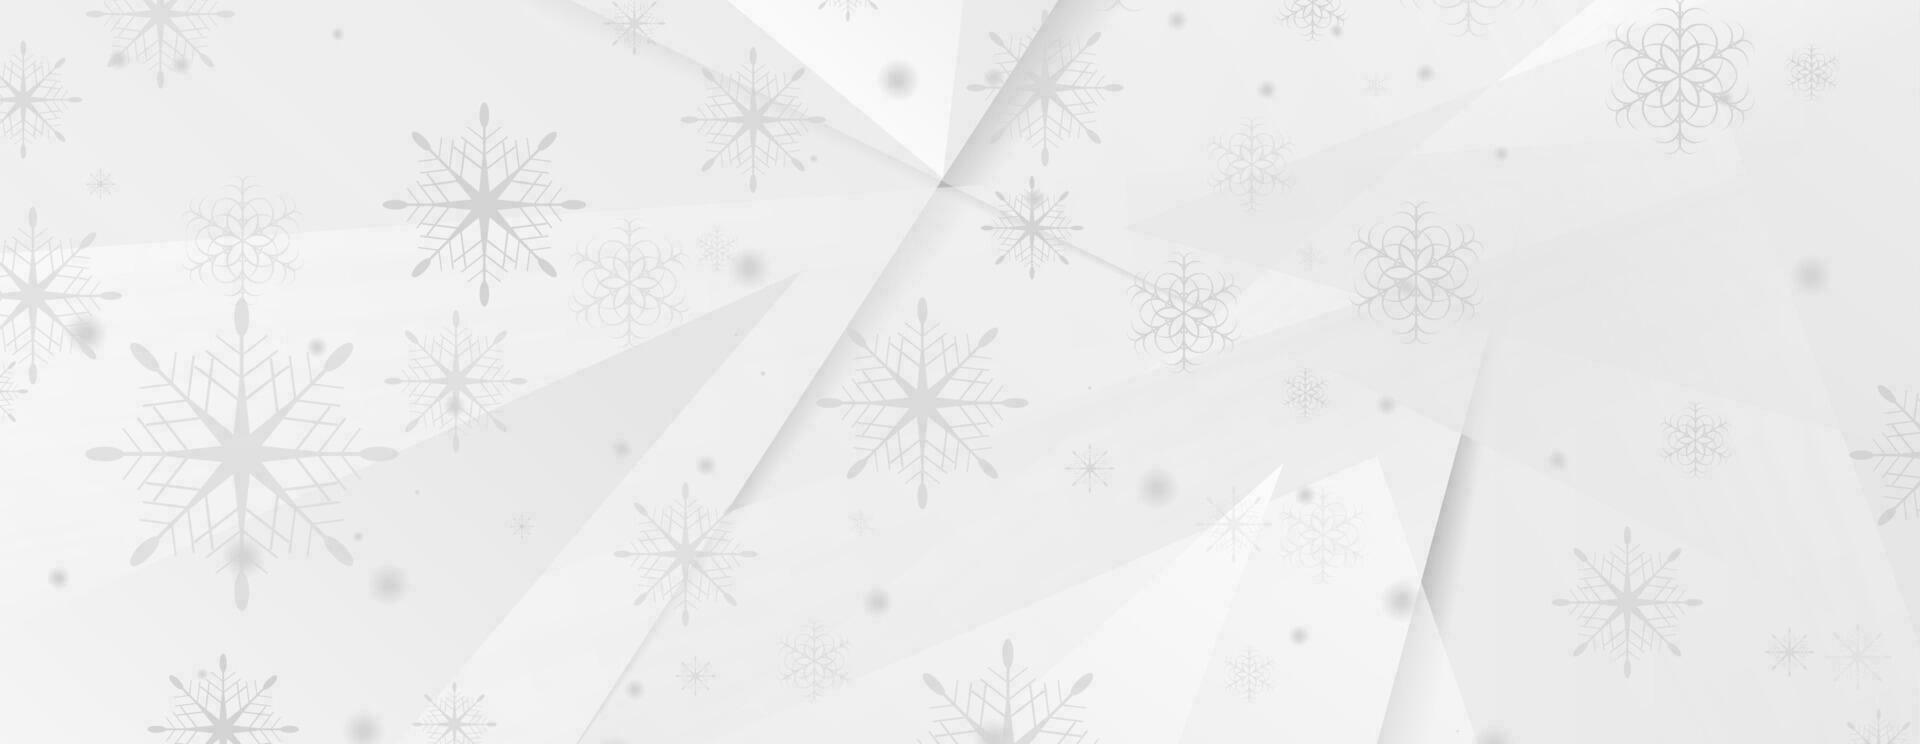 Low poly geometric Christmas winter background vector